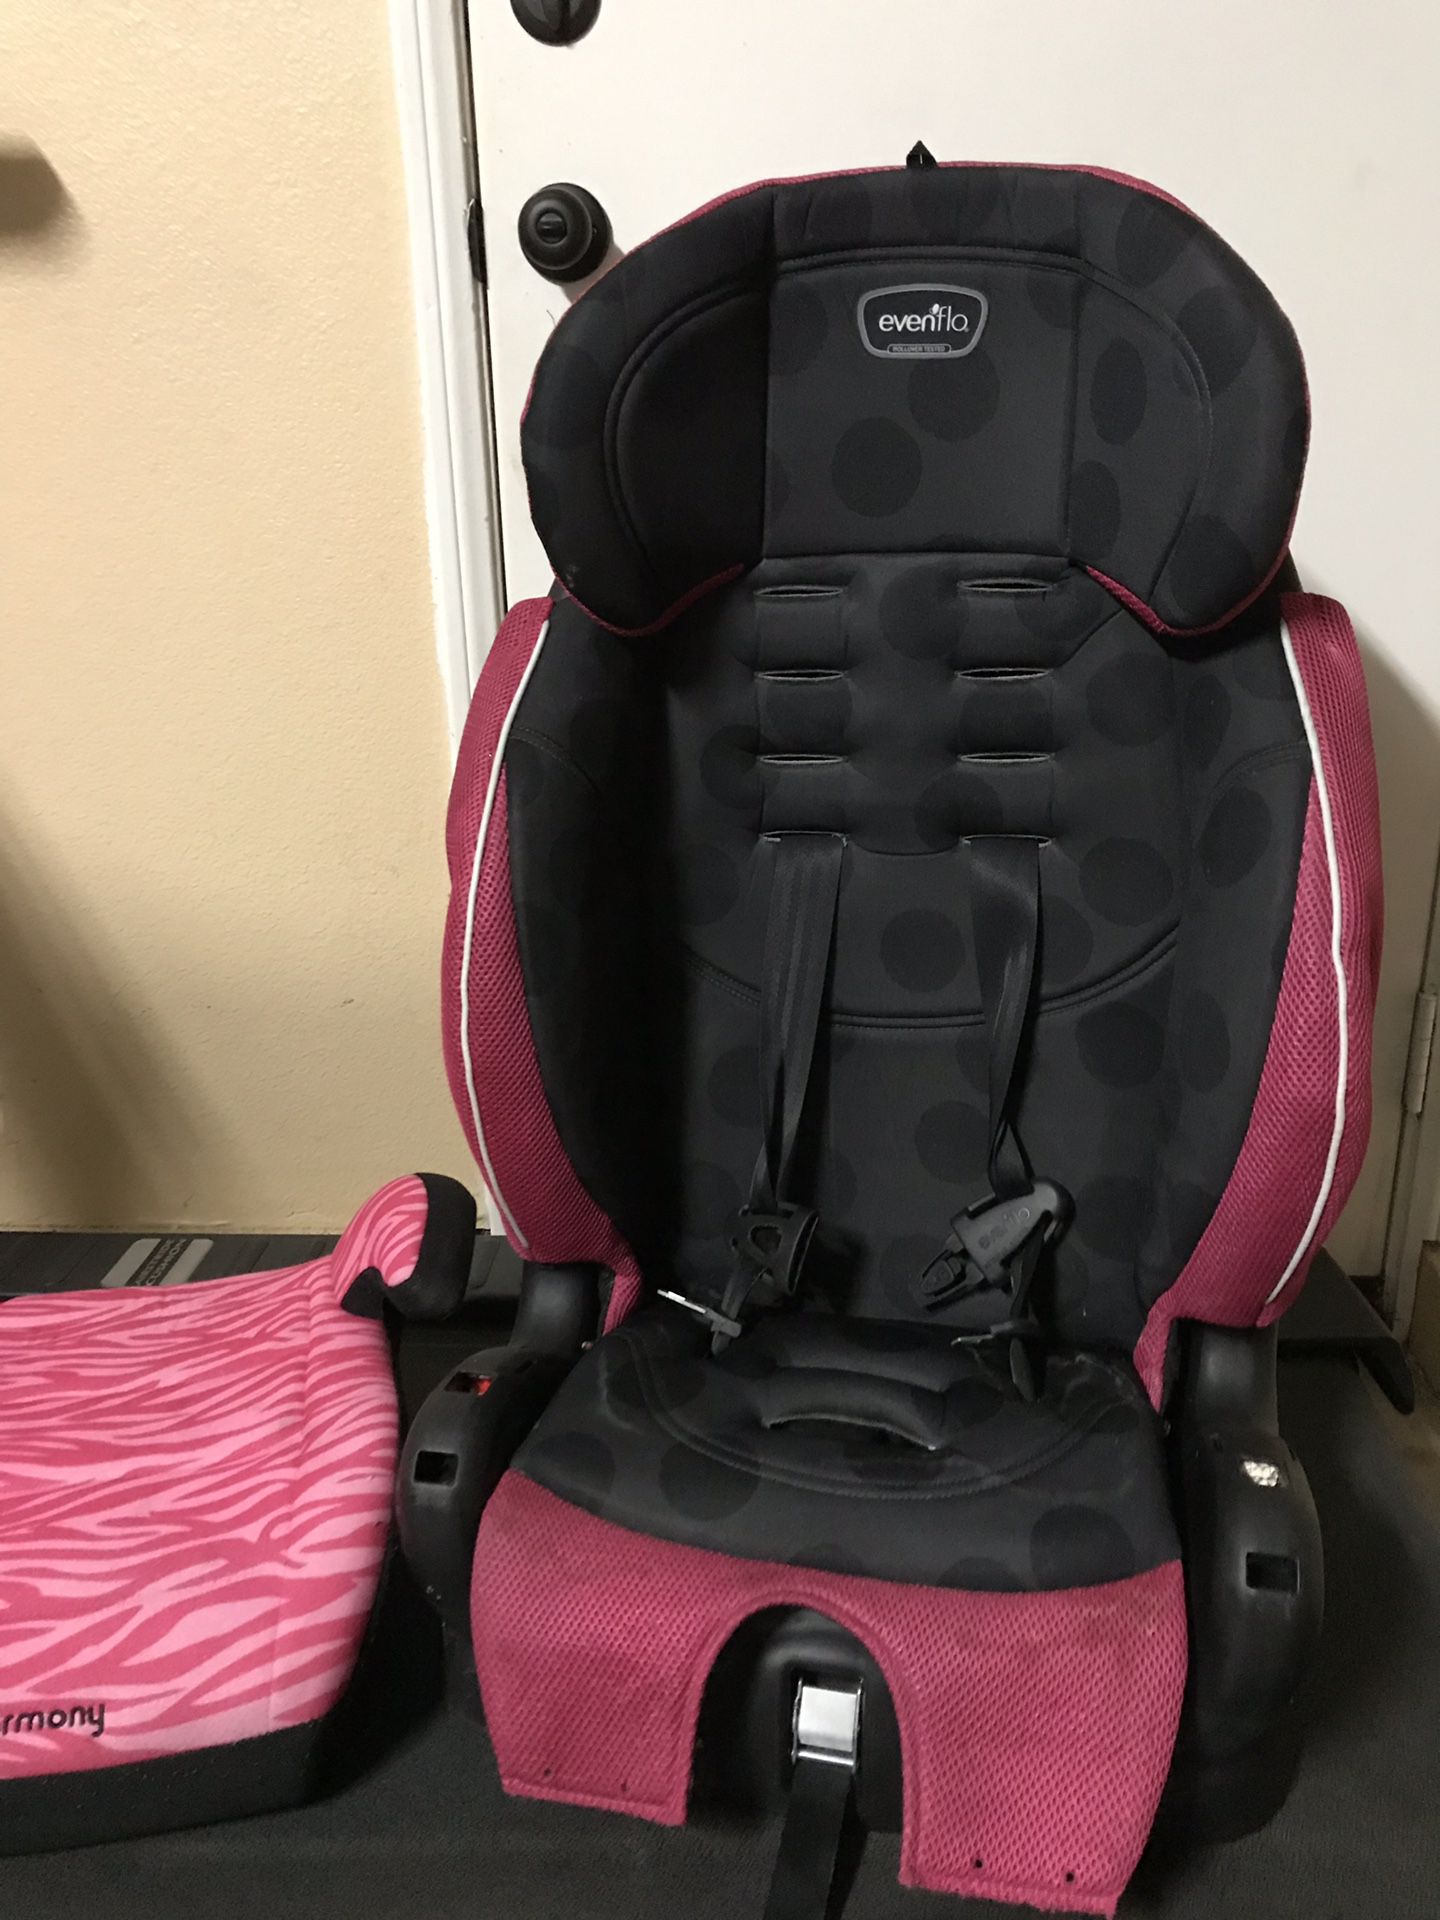 Evenflo Advanced Chase Lx Harness Booster Seat